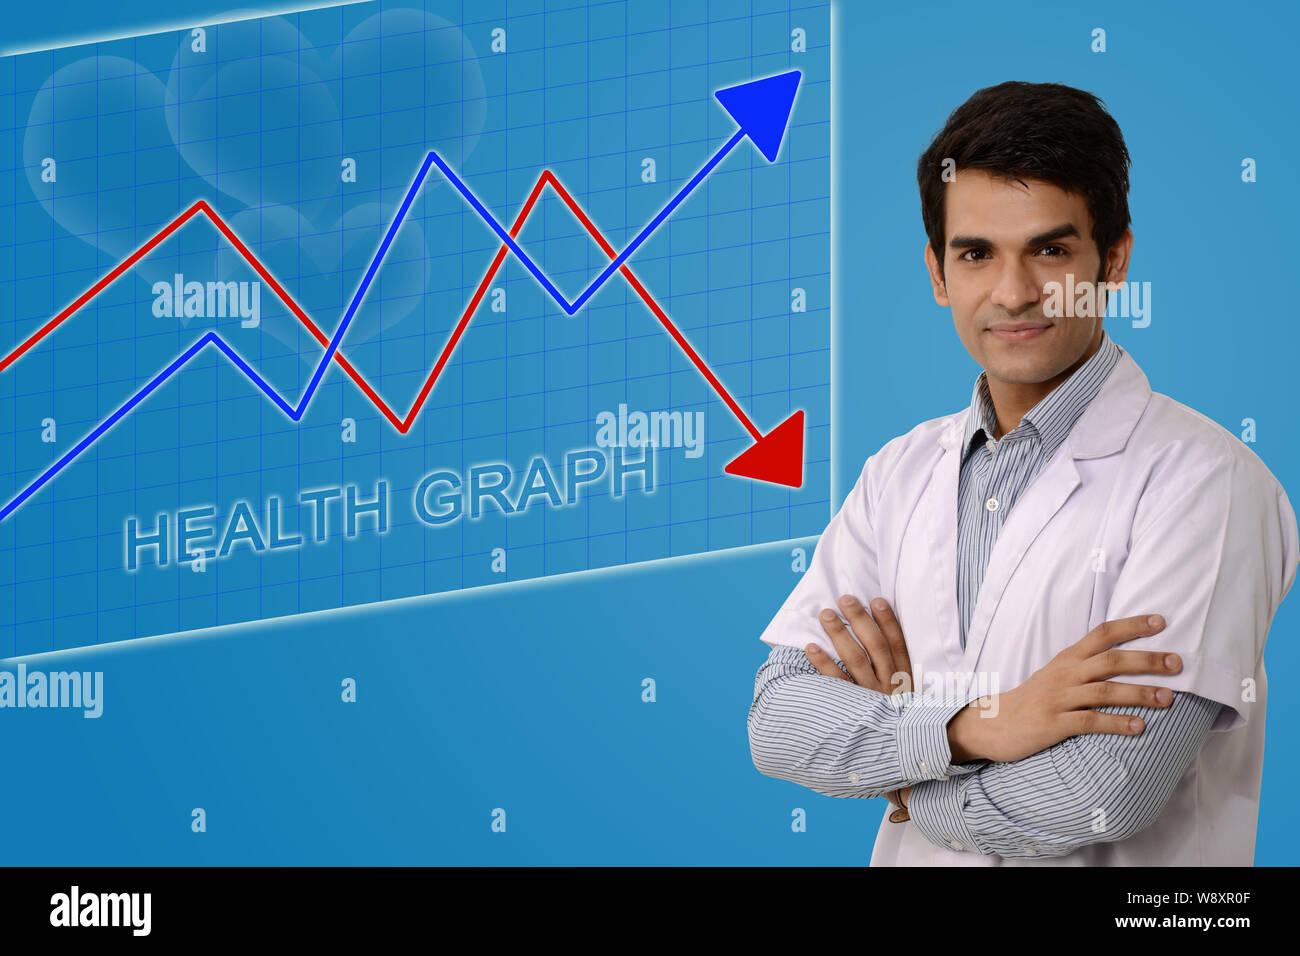 Male doctor standing with his arms crossed Stock Photo